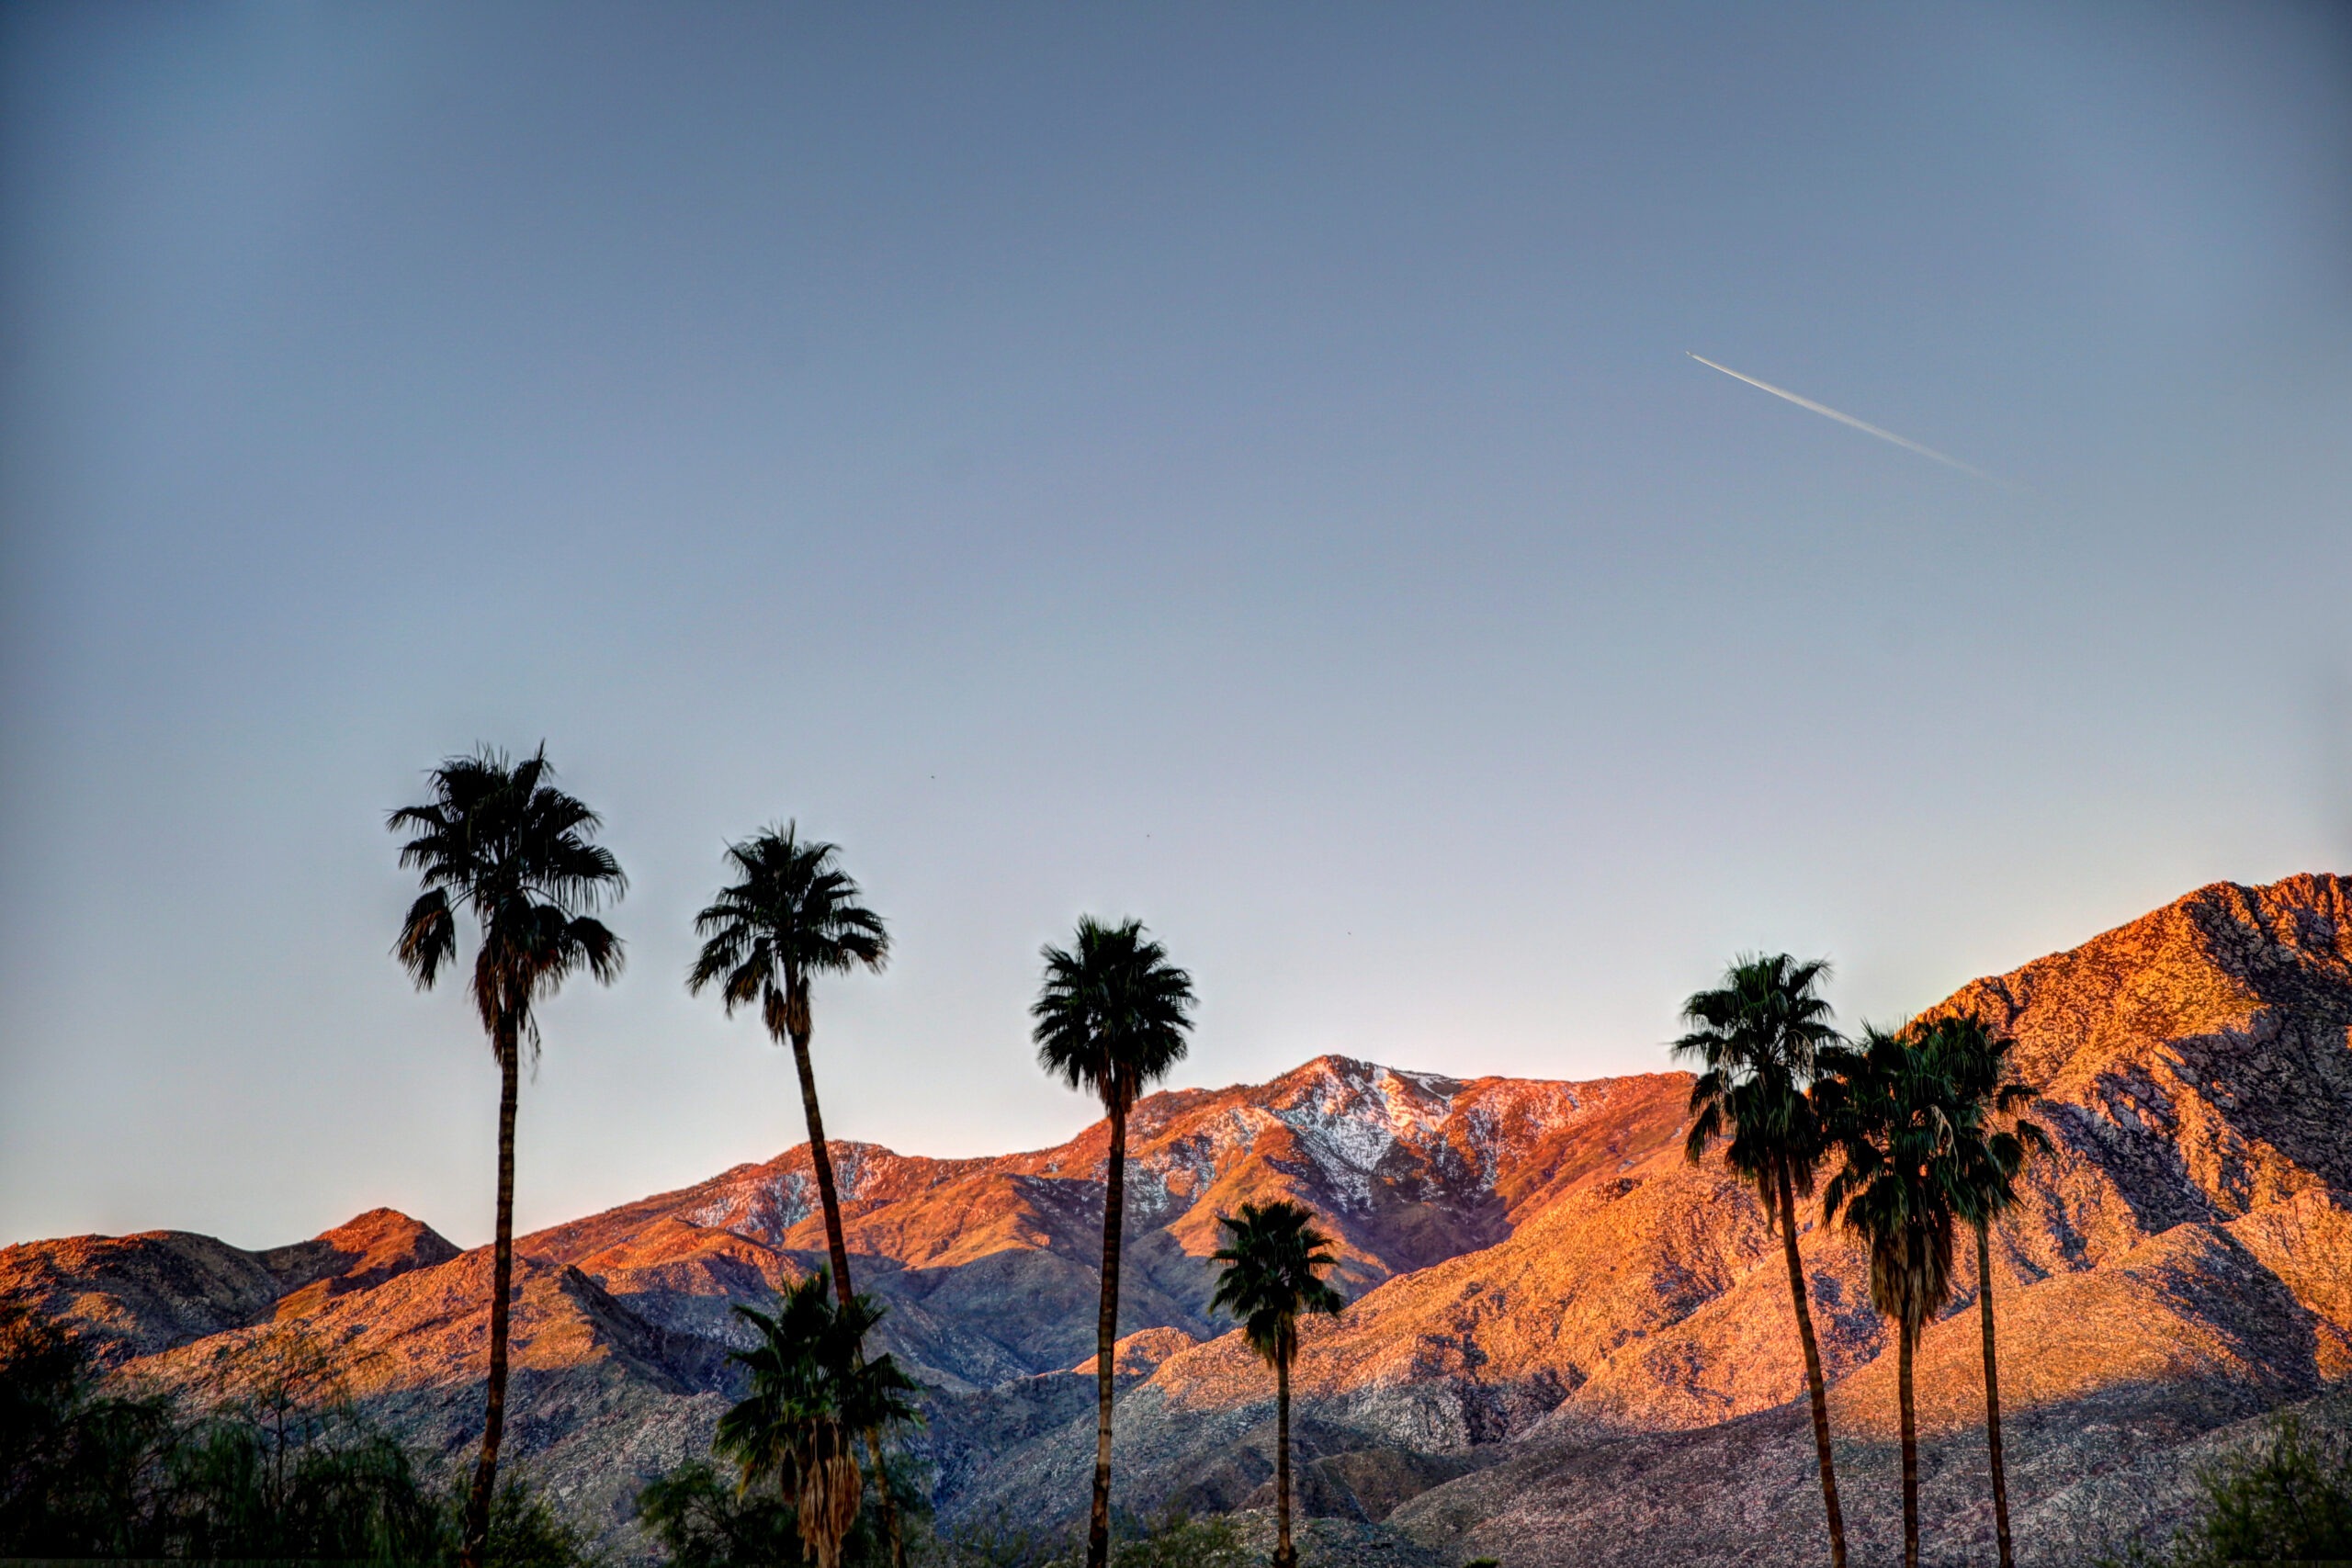 mountains in background and palm trees in foreground